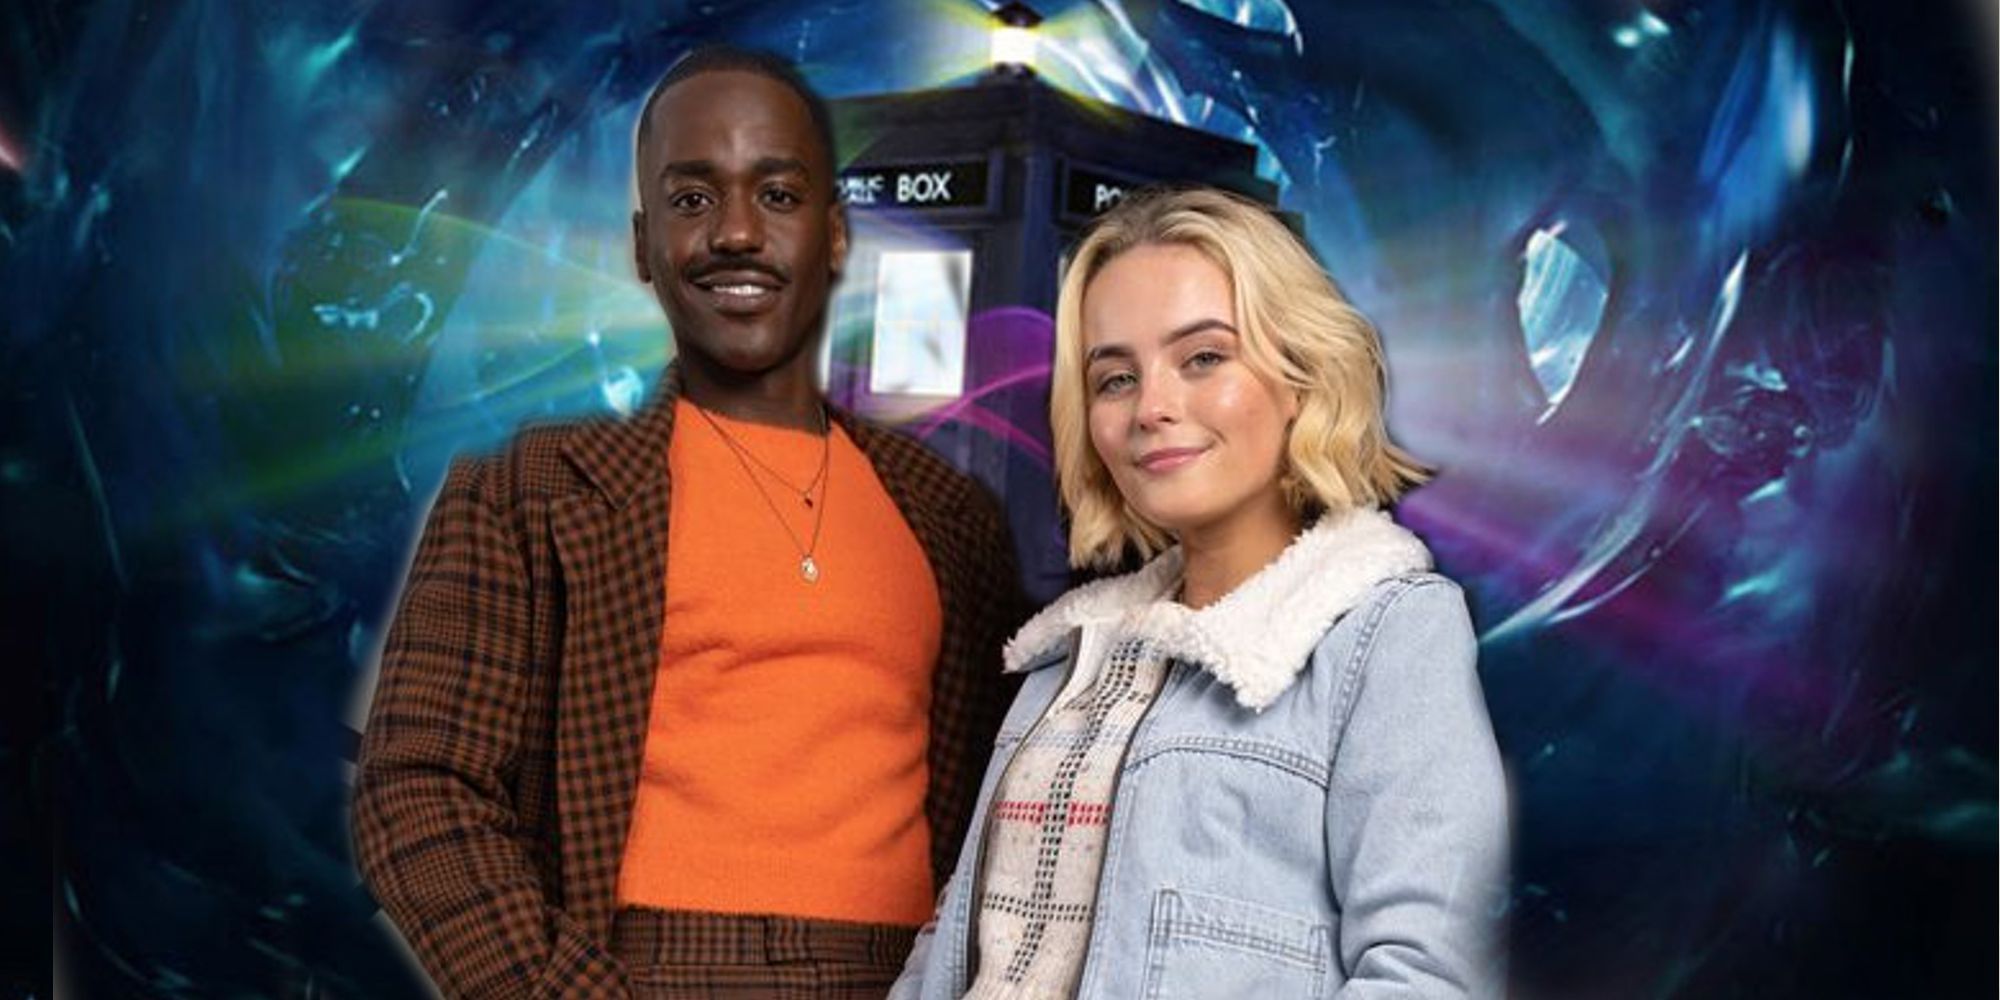 Doctor Who Ncuti Gatwa and Millie Gibson as The Fifteenth Doctor and Ruby Sunday in front of the TARDIS